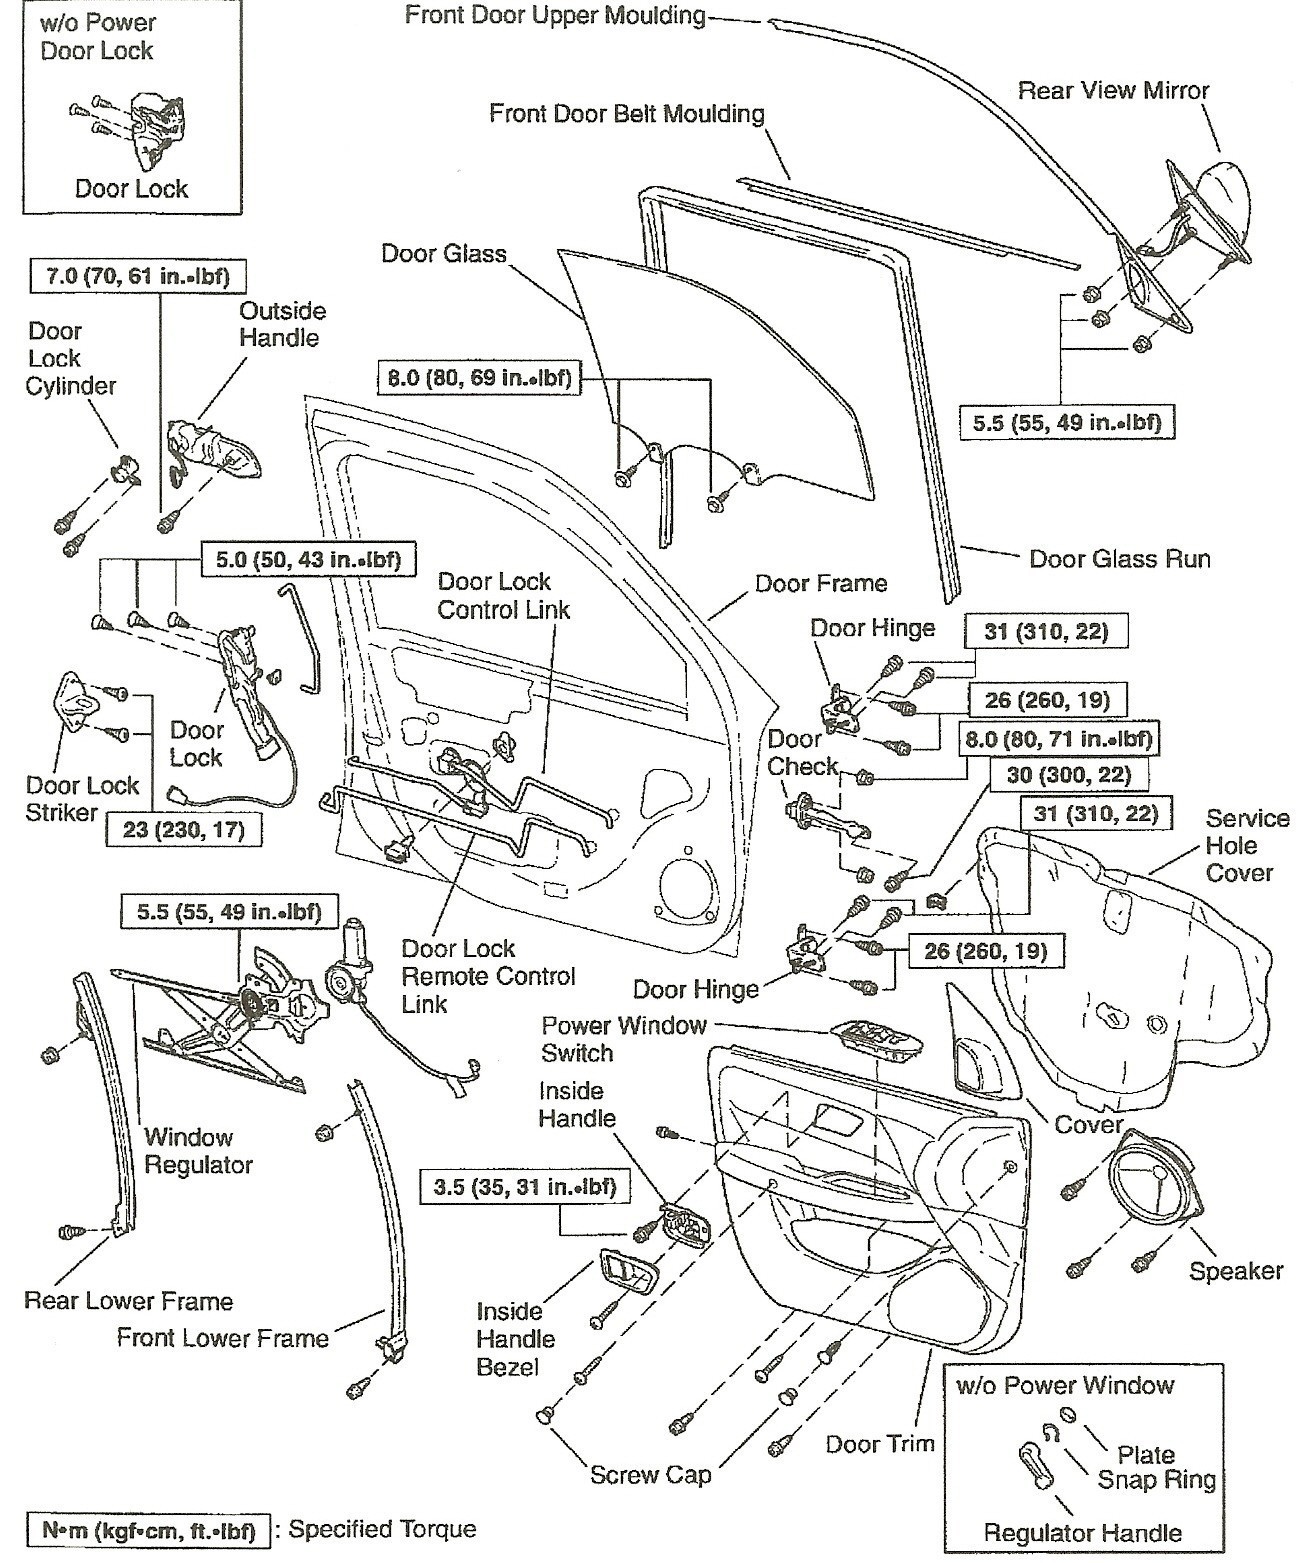 Toyota Avalon Engine Diagram Great Description About 2005 Avalon with Awesome Gallery Of Toyota Avalon Engine Diagram